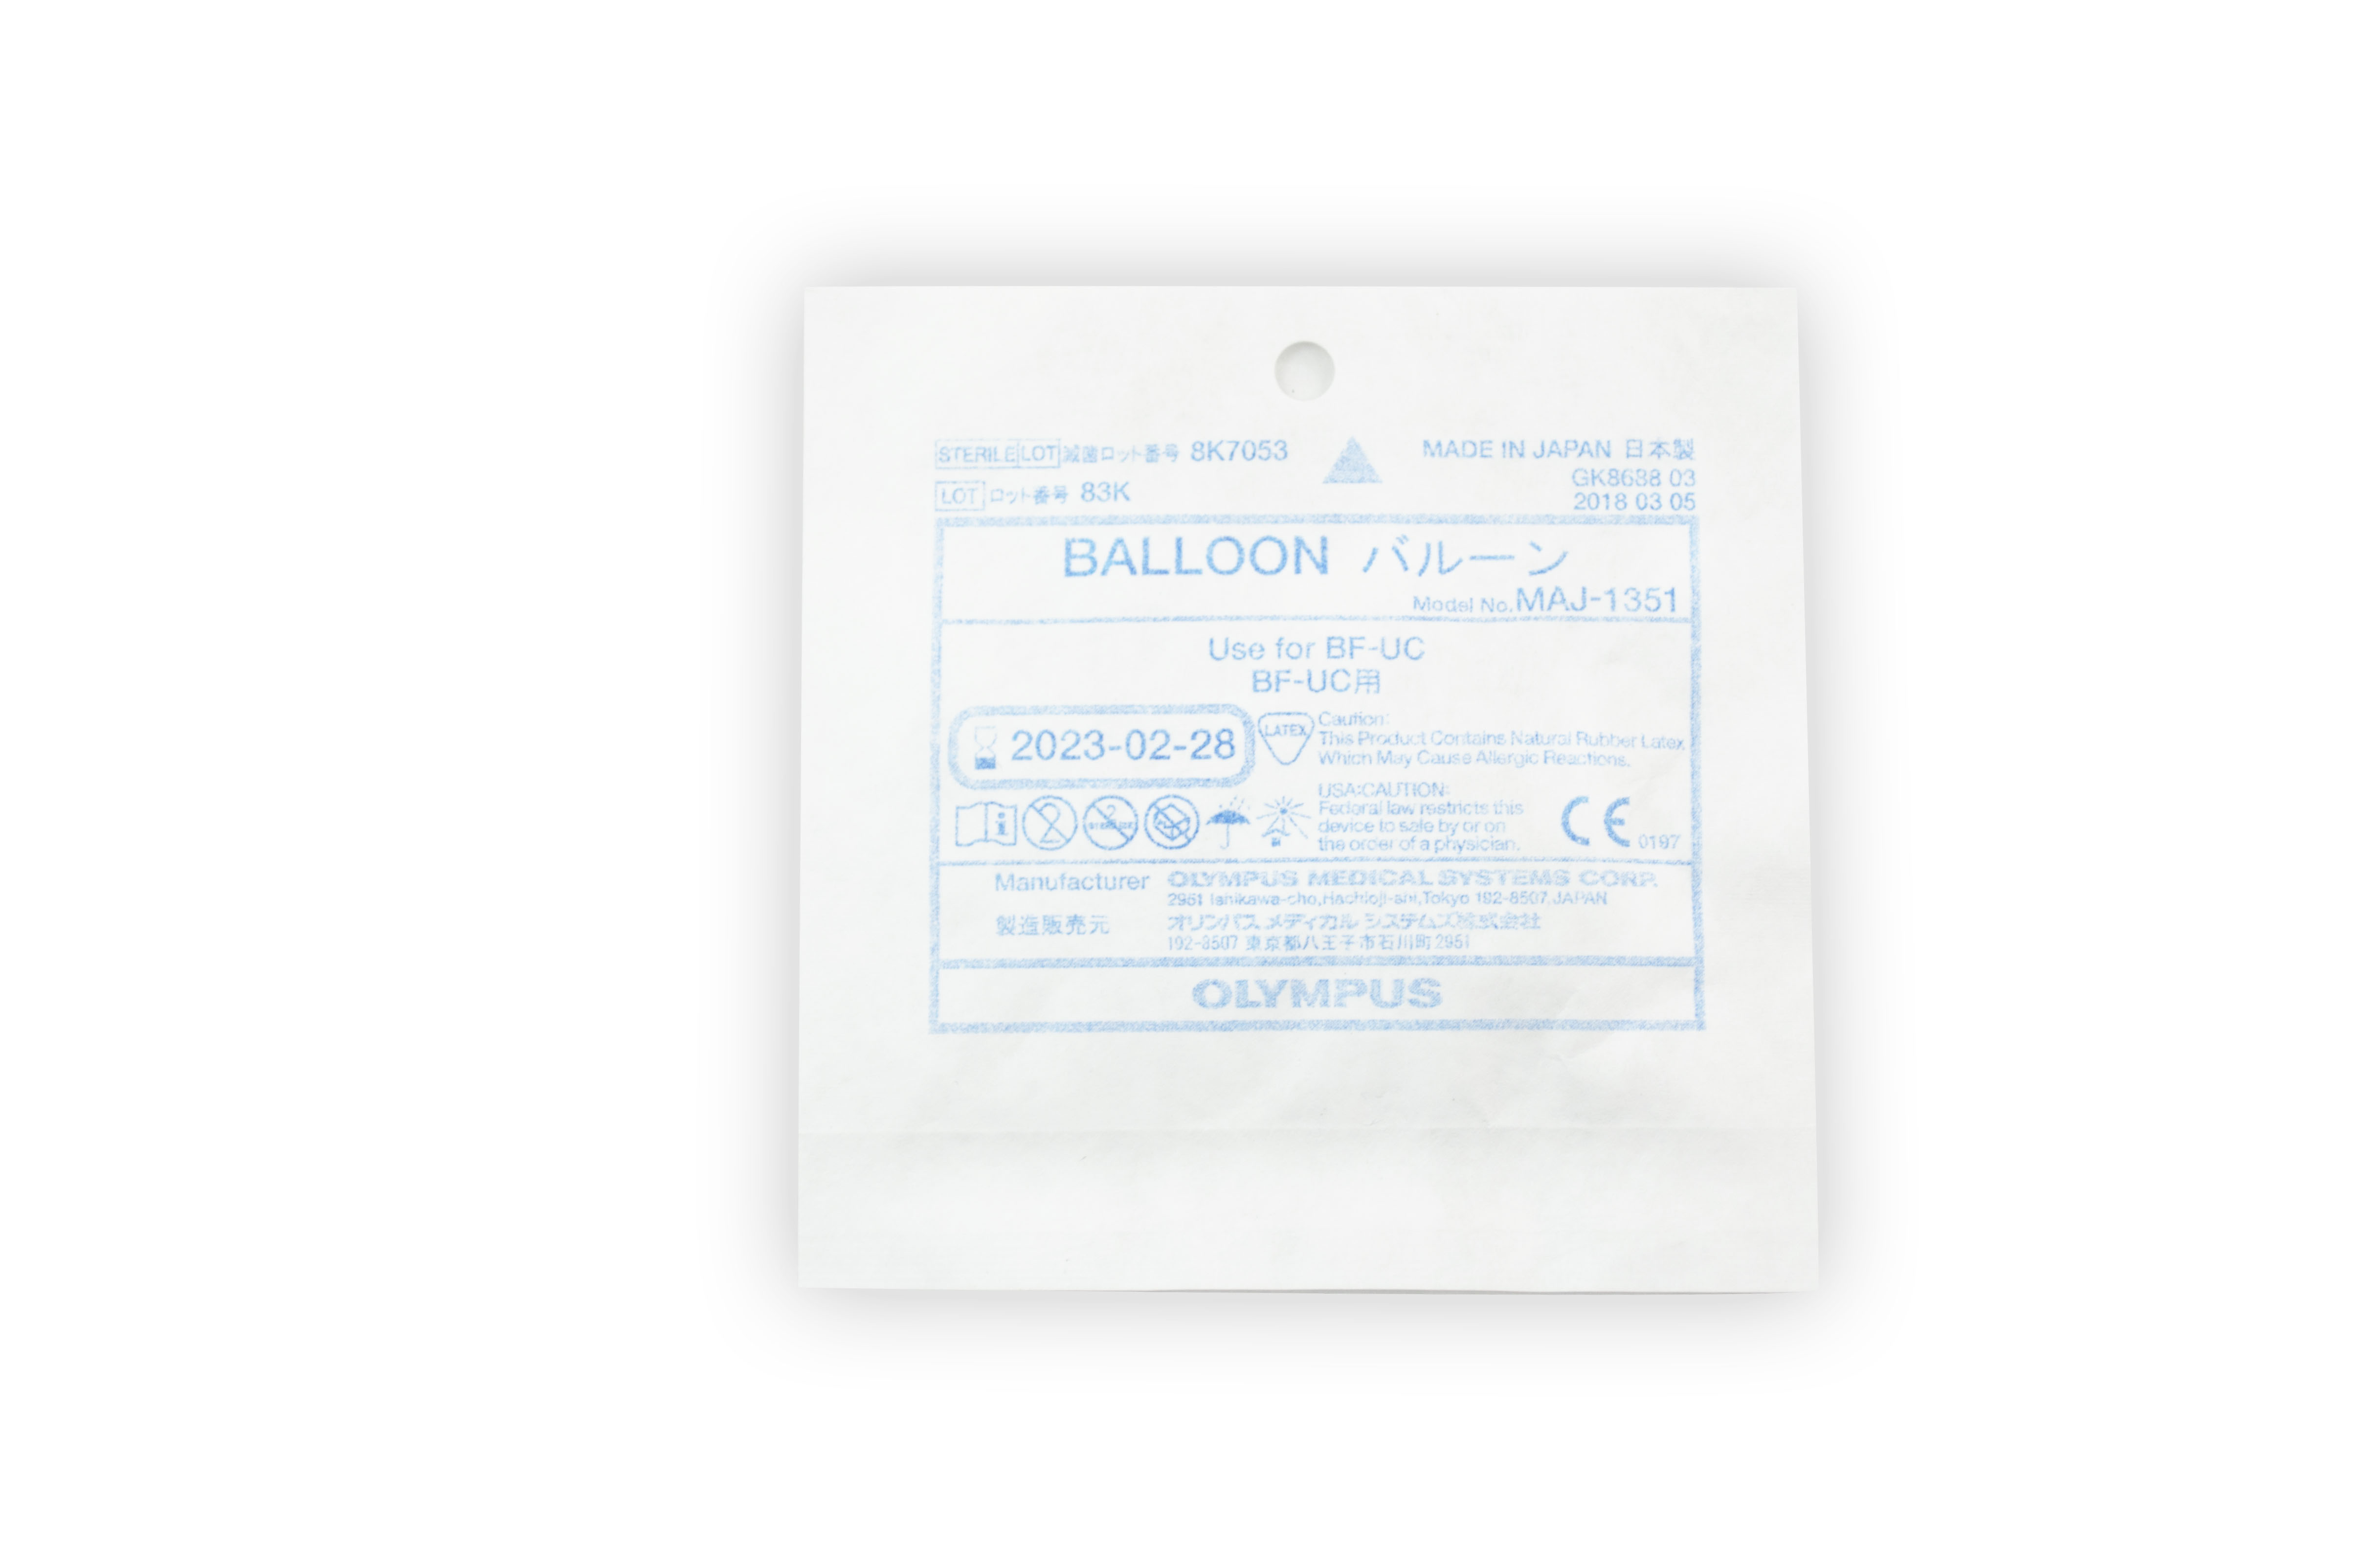 [In-Date] Olympus Disposable Balloon (Each) - MAJ-1351: For Ultrasonic Bronchoscopes: BF-UC160F, BF-UC180F (sterile, contains latex) (Original Packaging)